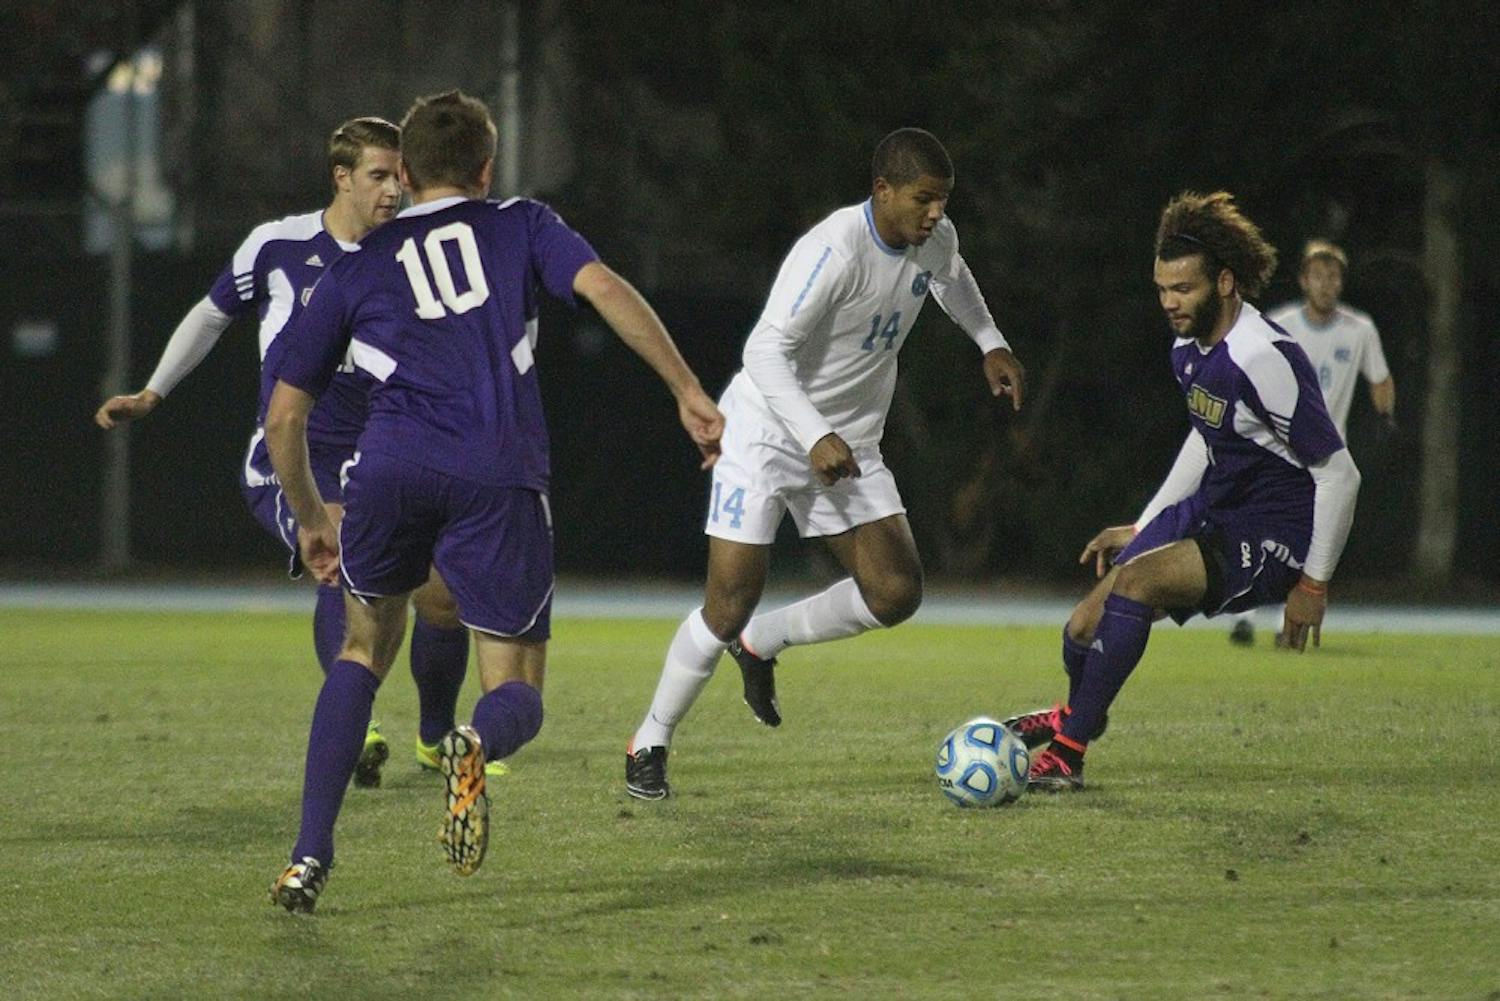 UNC midfielder Omar Holness (14) takes control of the ball. Holness had one assist on Thursday.